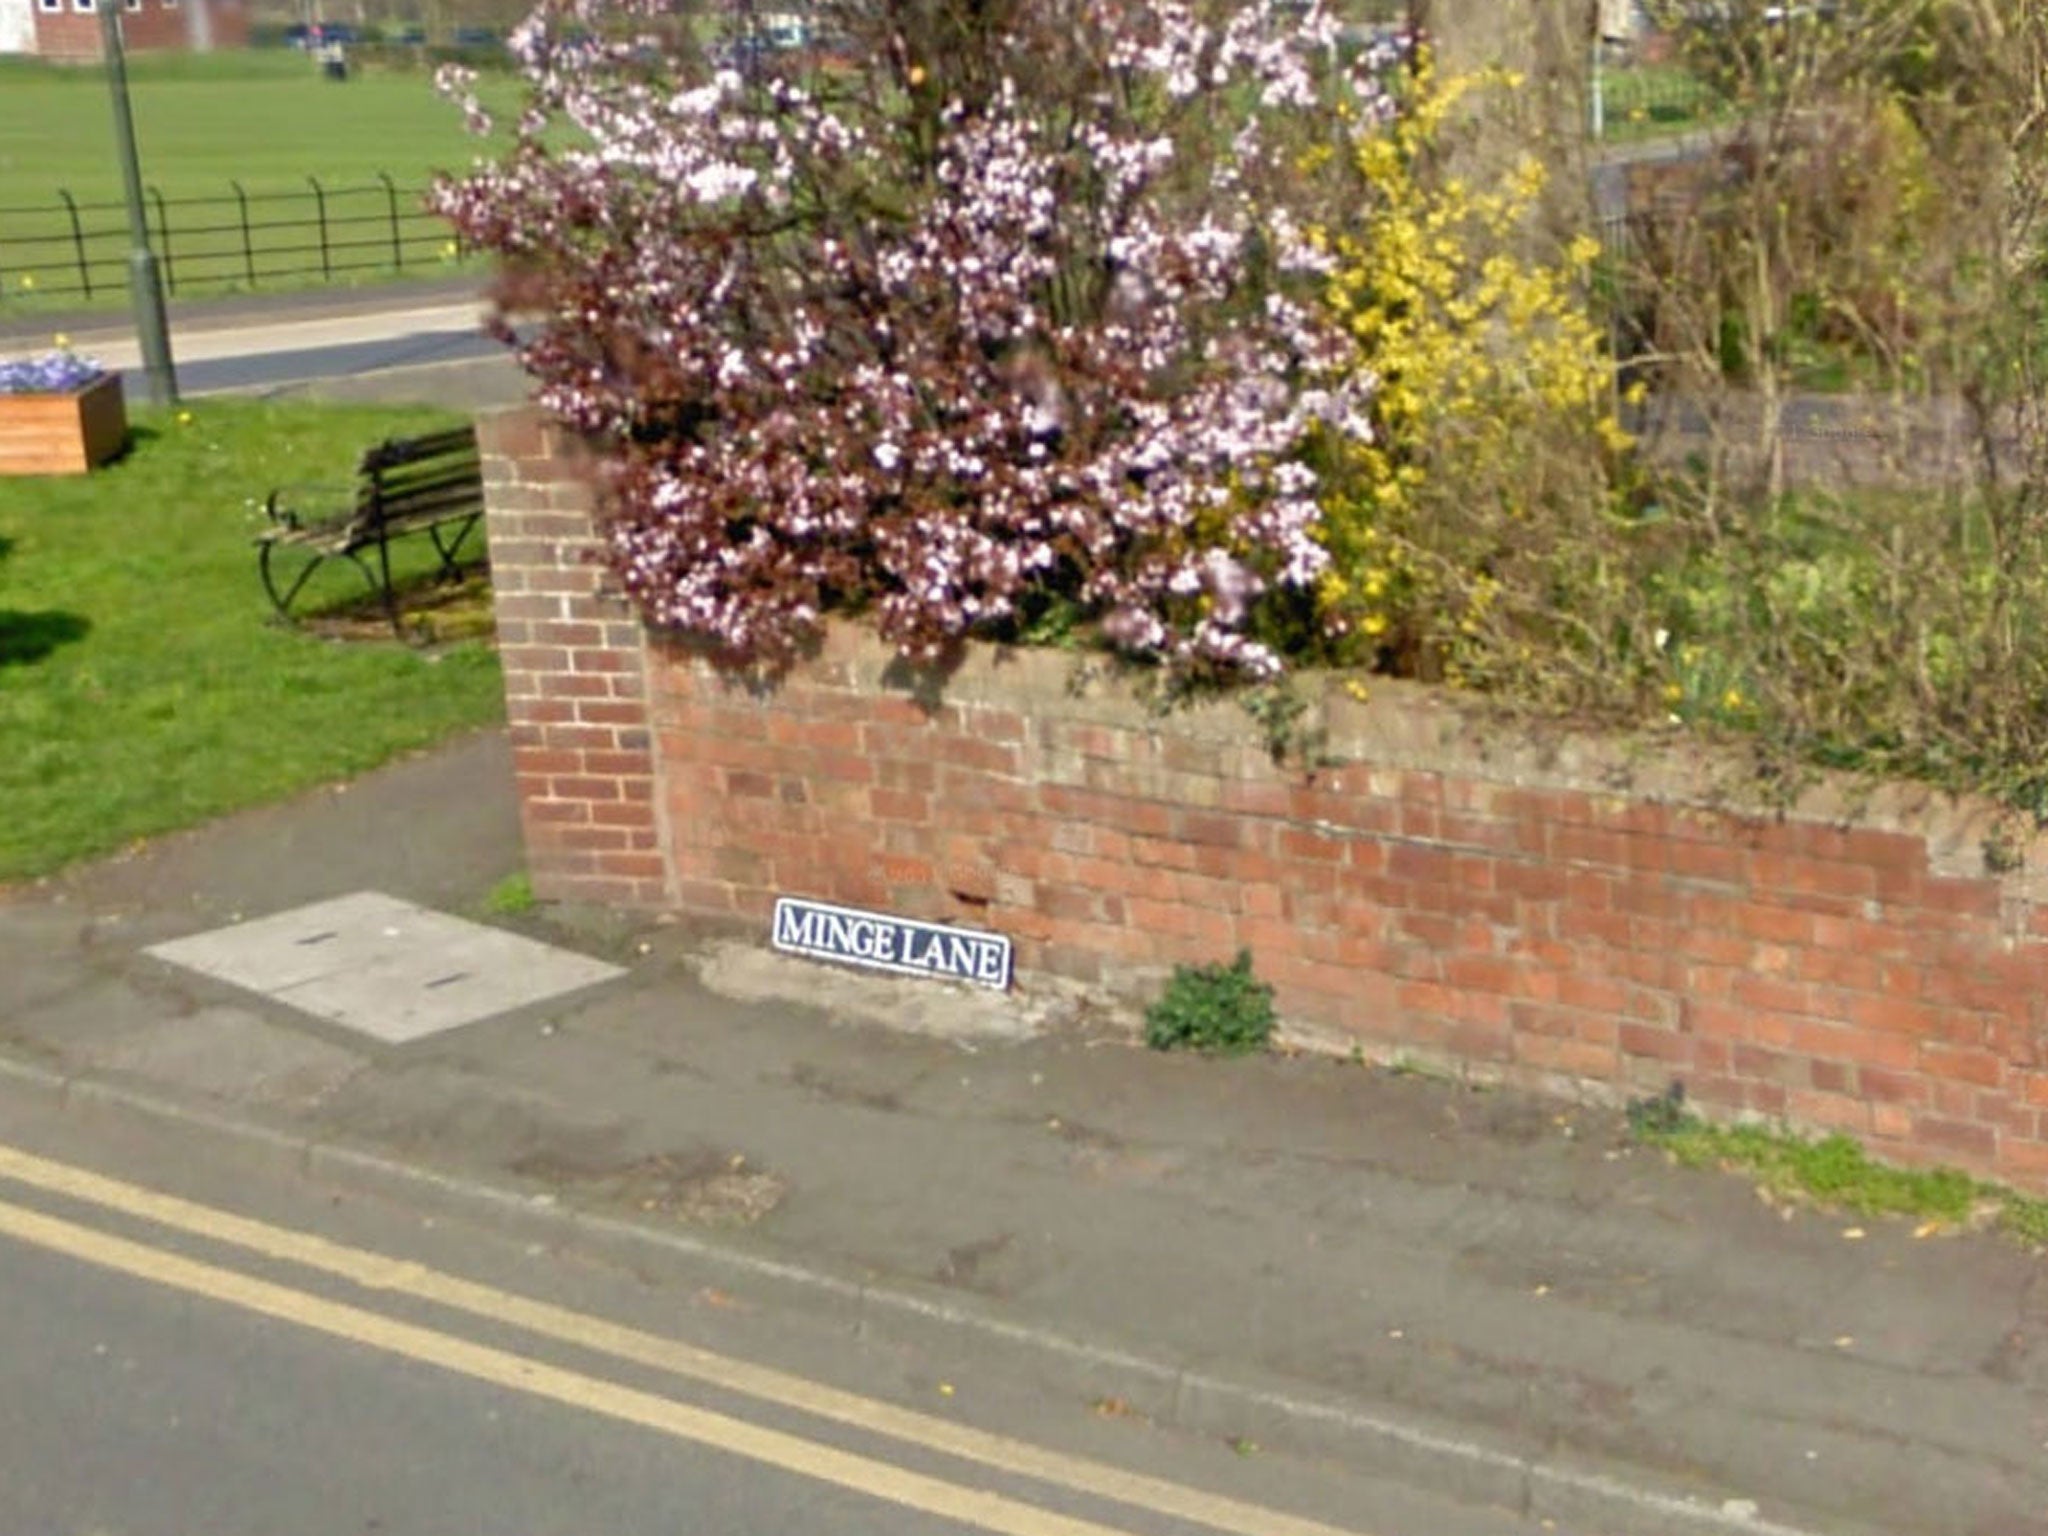 Minge Lane, in Upton-upon-Severn, Worcestershire, was voted the UK's most embarrassing street name